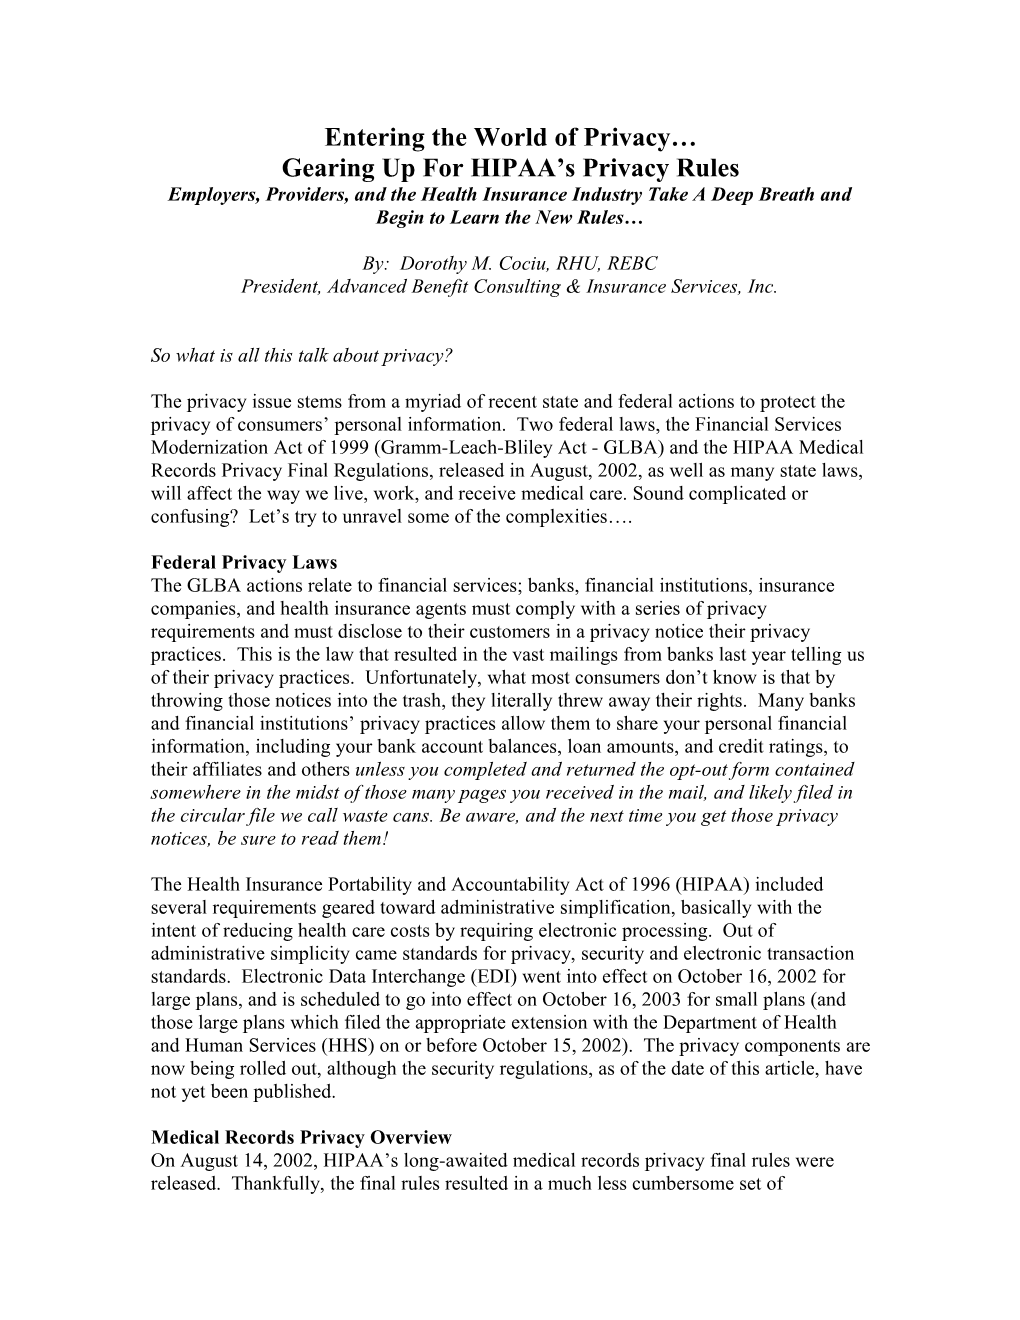 Gearing up for HIPAA S Privacy Rules